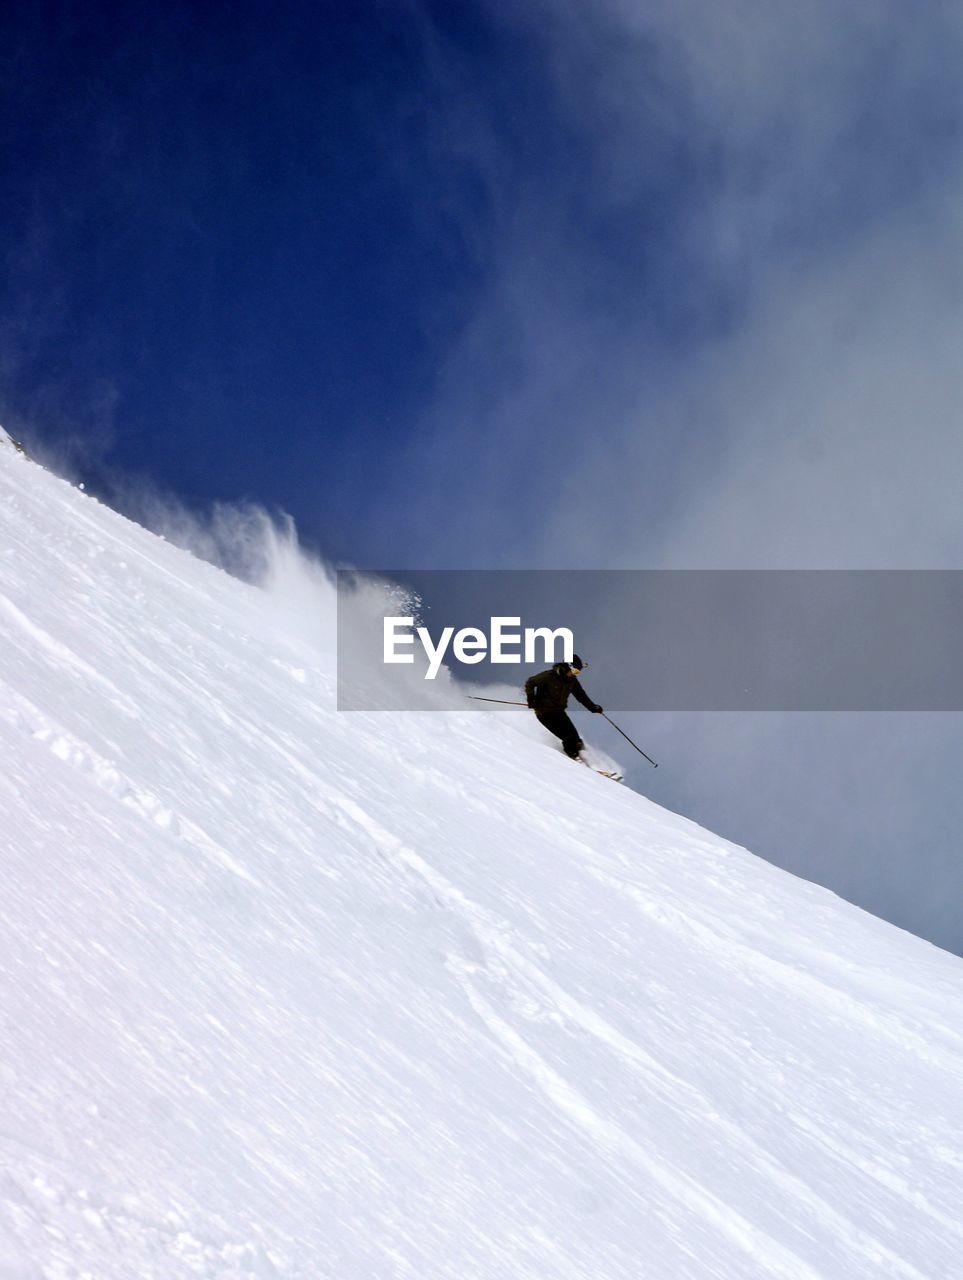 Person skiing on snow covered slope against sky